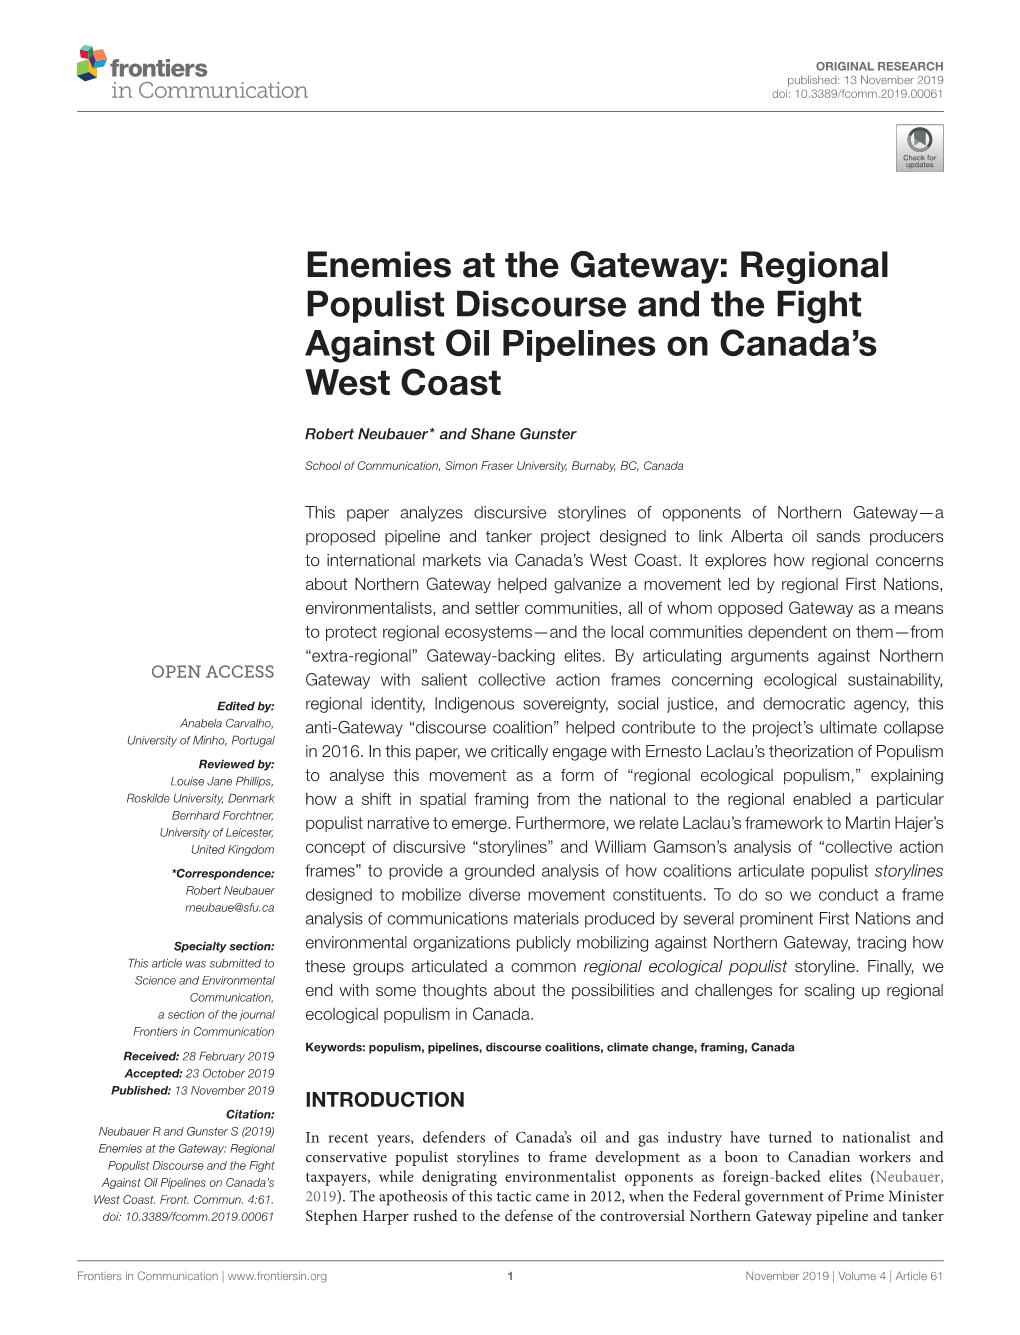 Enemies at the Gateway: Regional Populist Discourse and the Fight Against Oil Pipelines on Canada’S West Coast